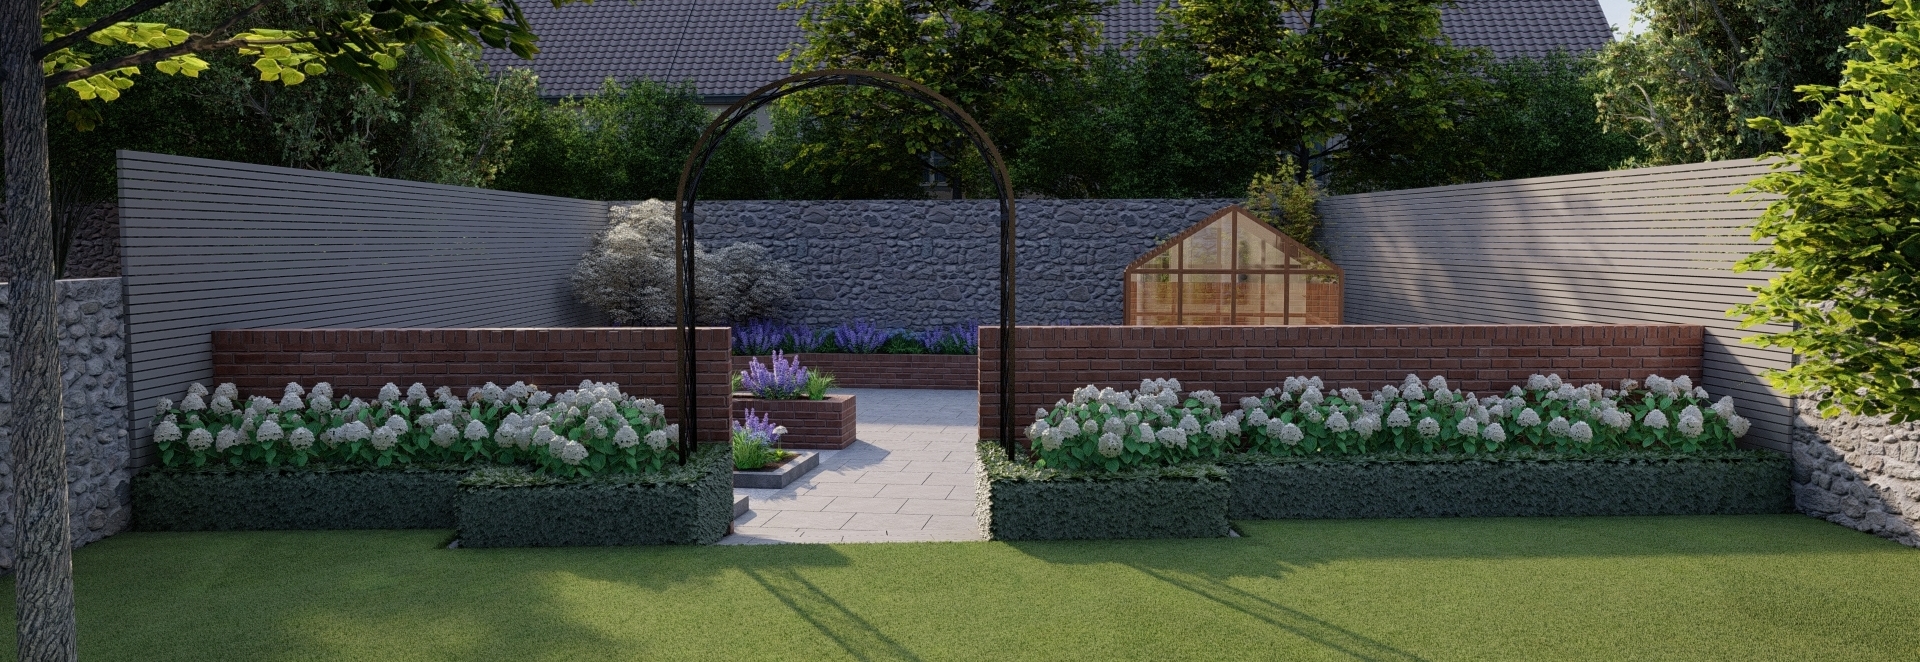 Family Garden Design Churchtown | Secluded space with sunny aspect, spacious patio, raised beds and timber greenhouse